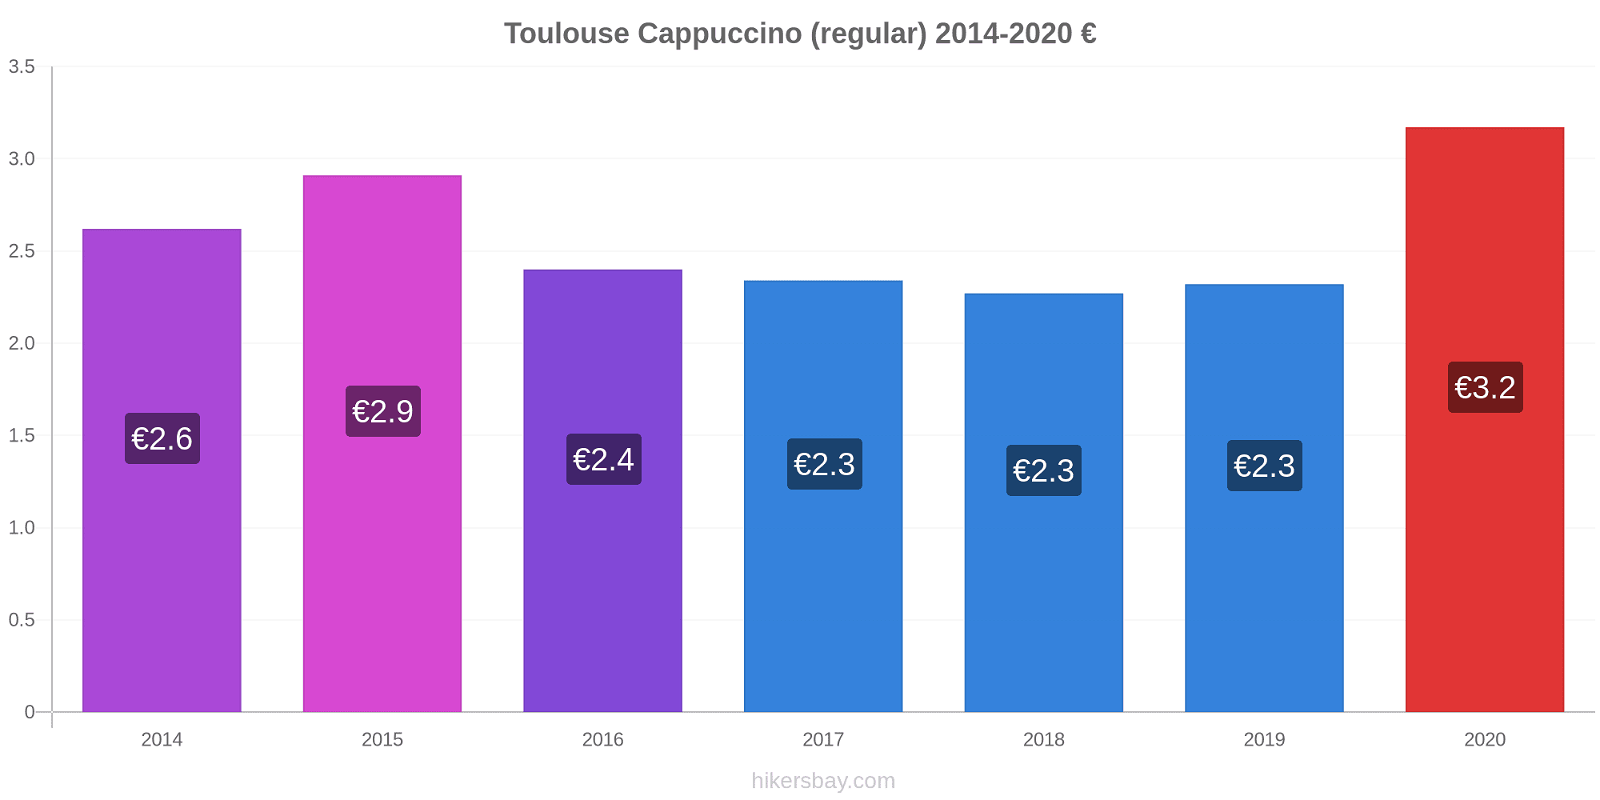 Toulouse price changes Cappuccino (regular) hikersbay.com